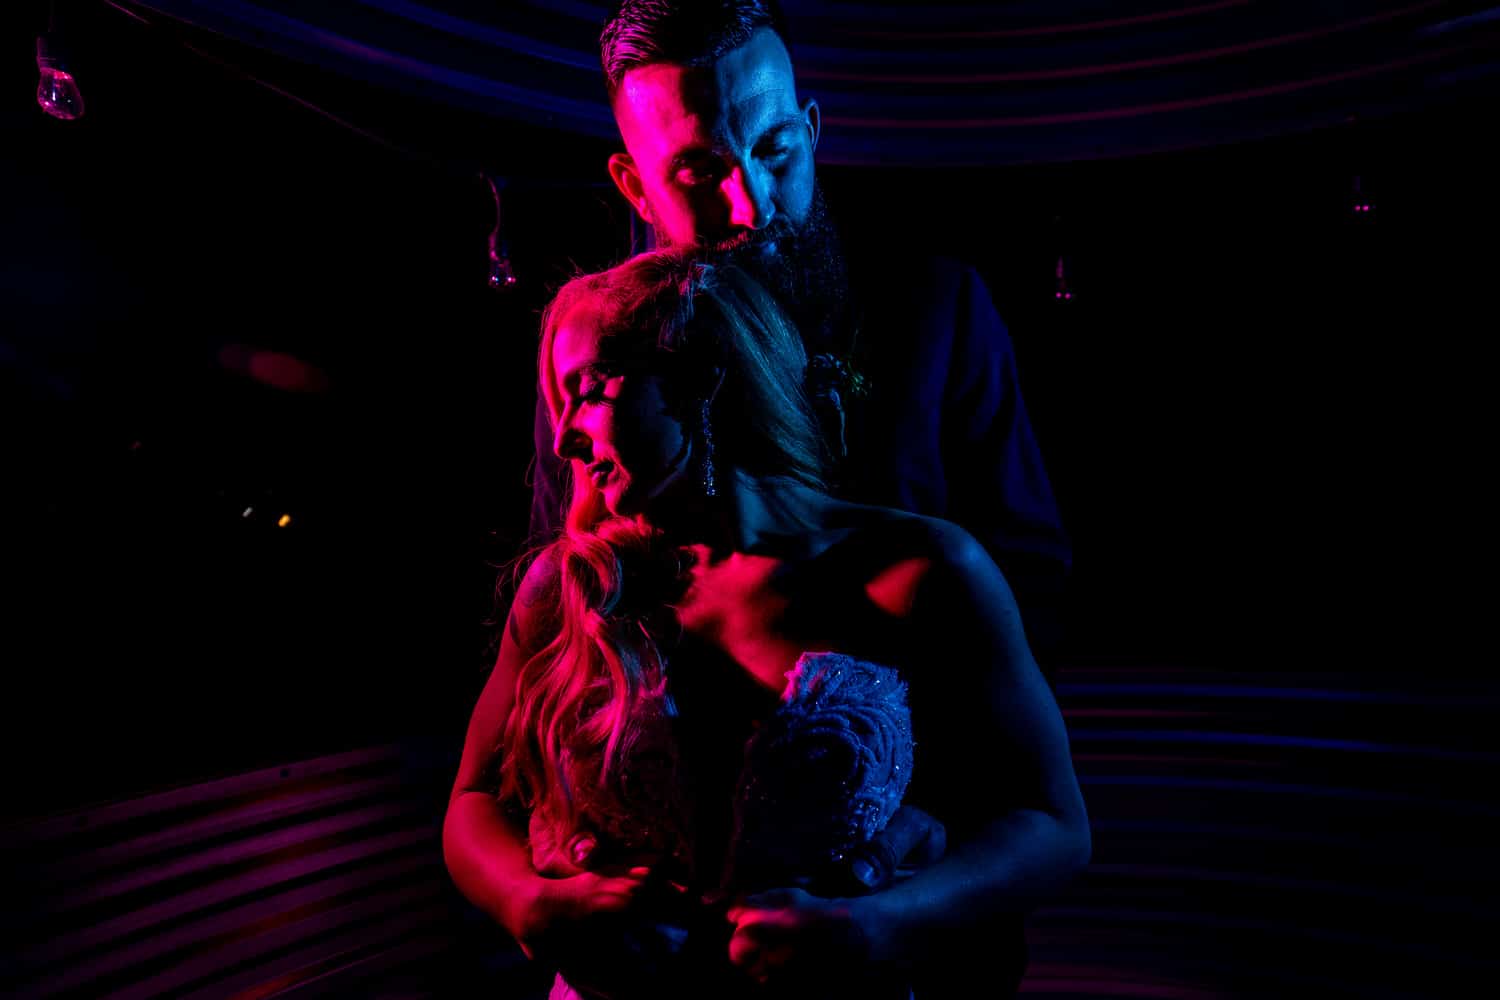 A dramatic, colorful picture of a bride and groom sharing an embrace on their wedding night. 